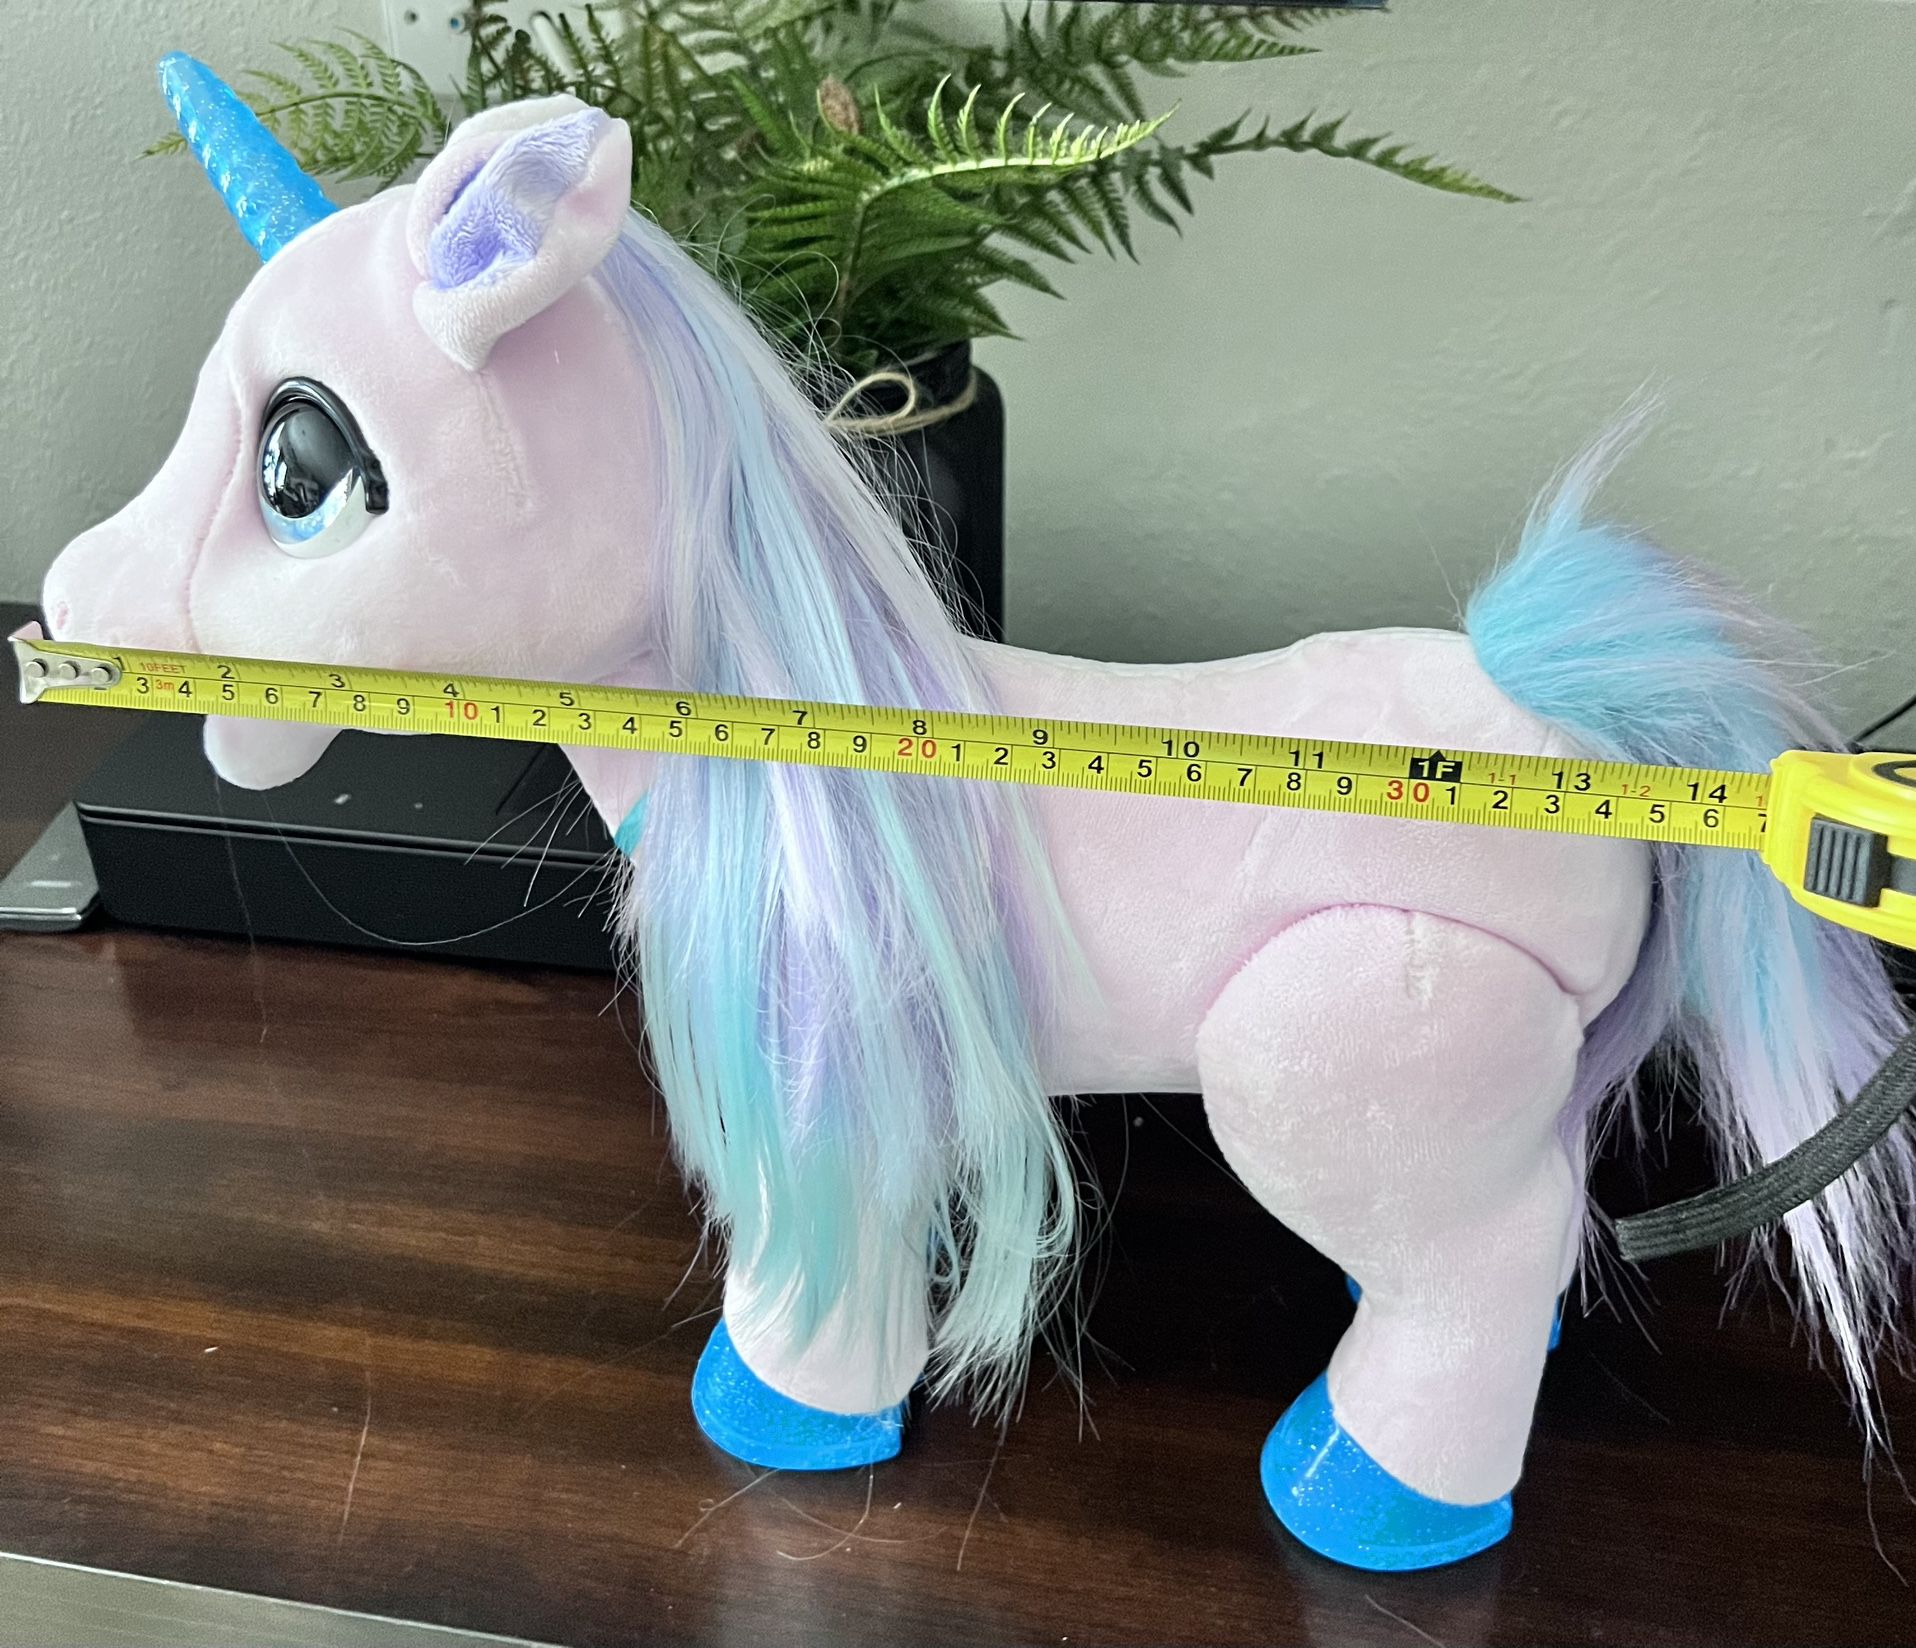 FurReal friend My Besticorn Interactive Plush Pet Toy, 100+ Sounds & Reactions, Ages 4 and Up • SUCH A FANTASTICAL BFF! The furReal Blossom My Best